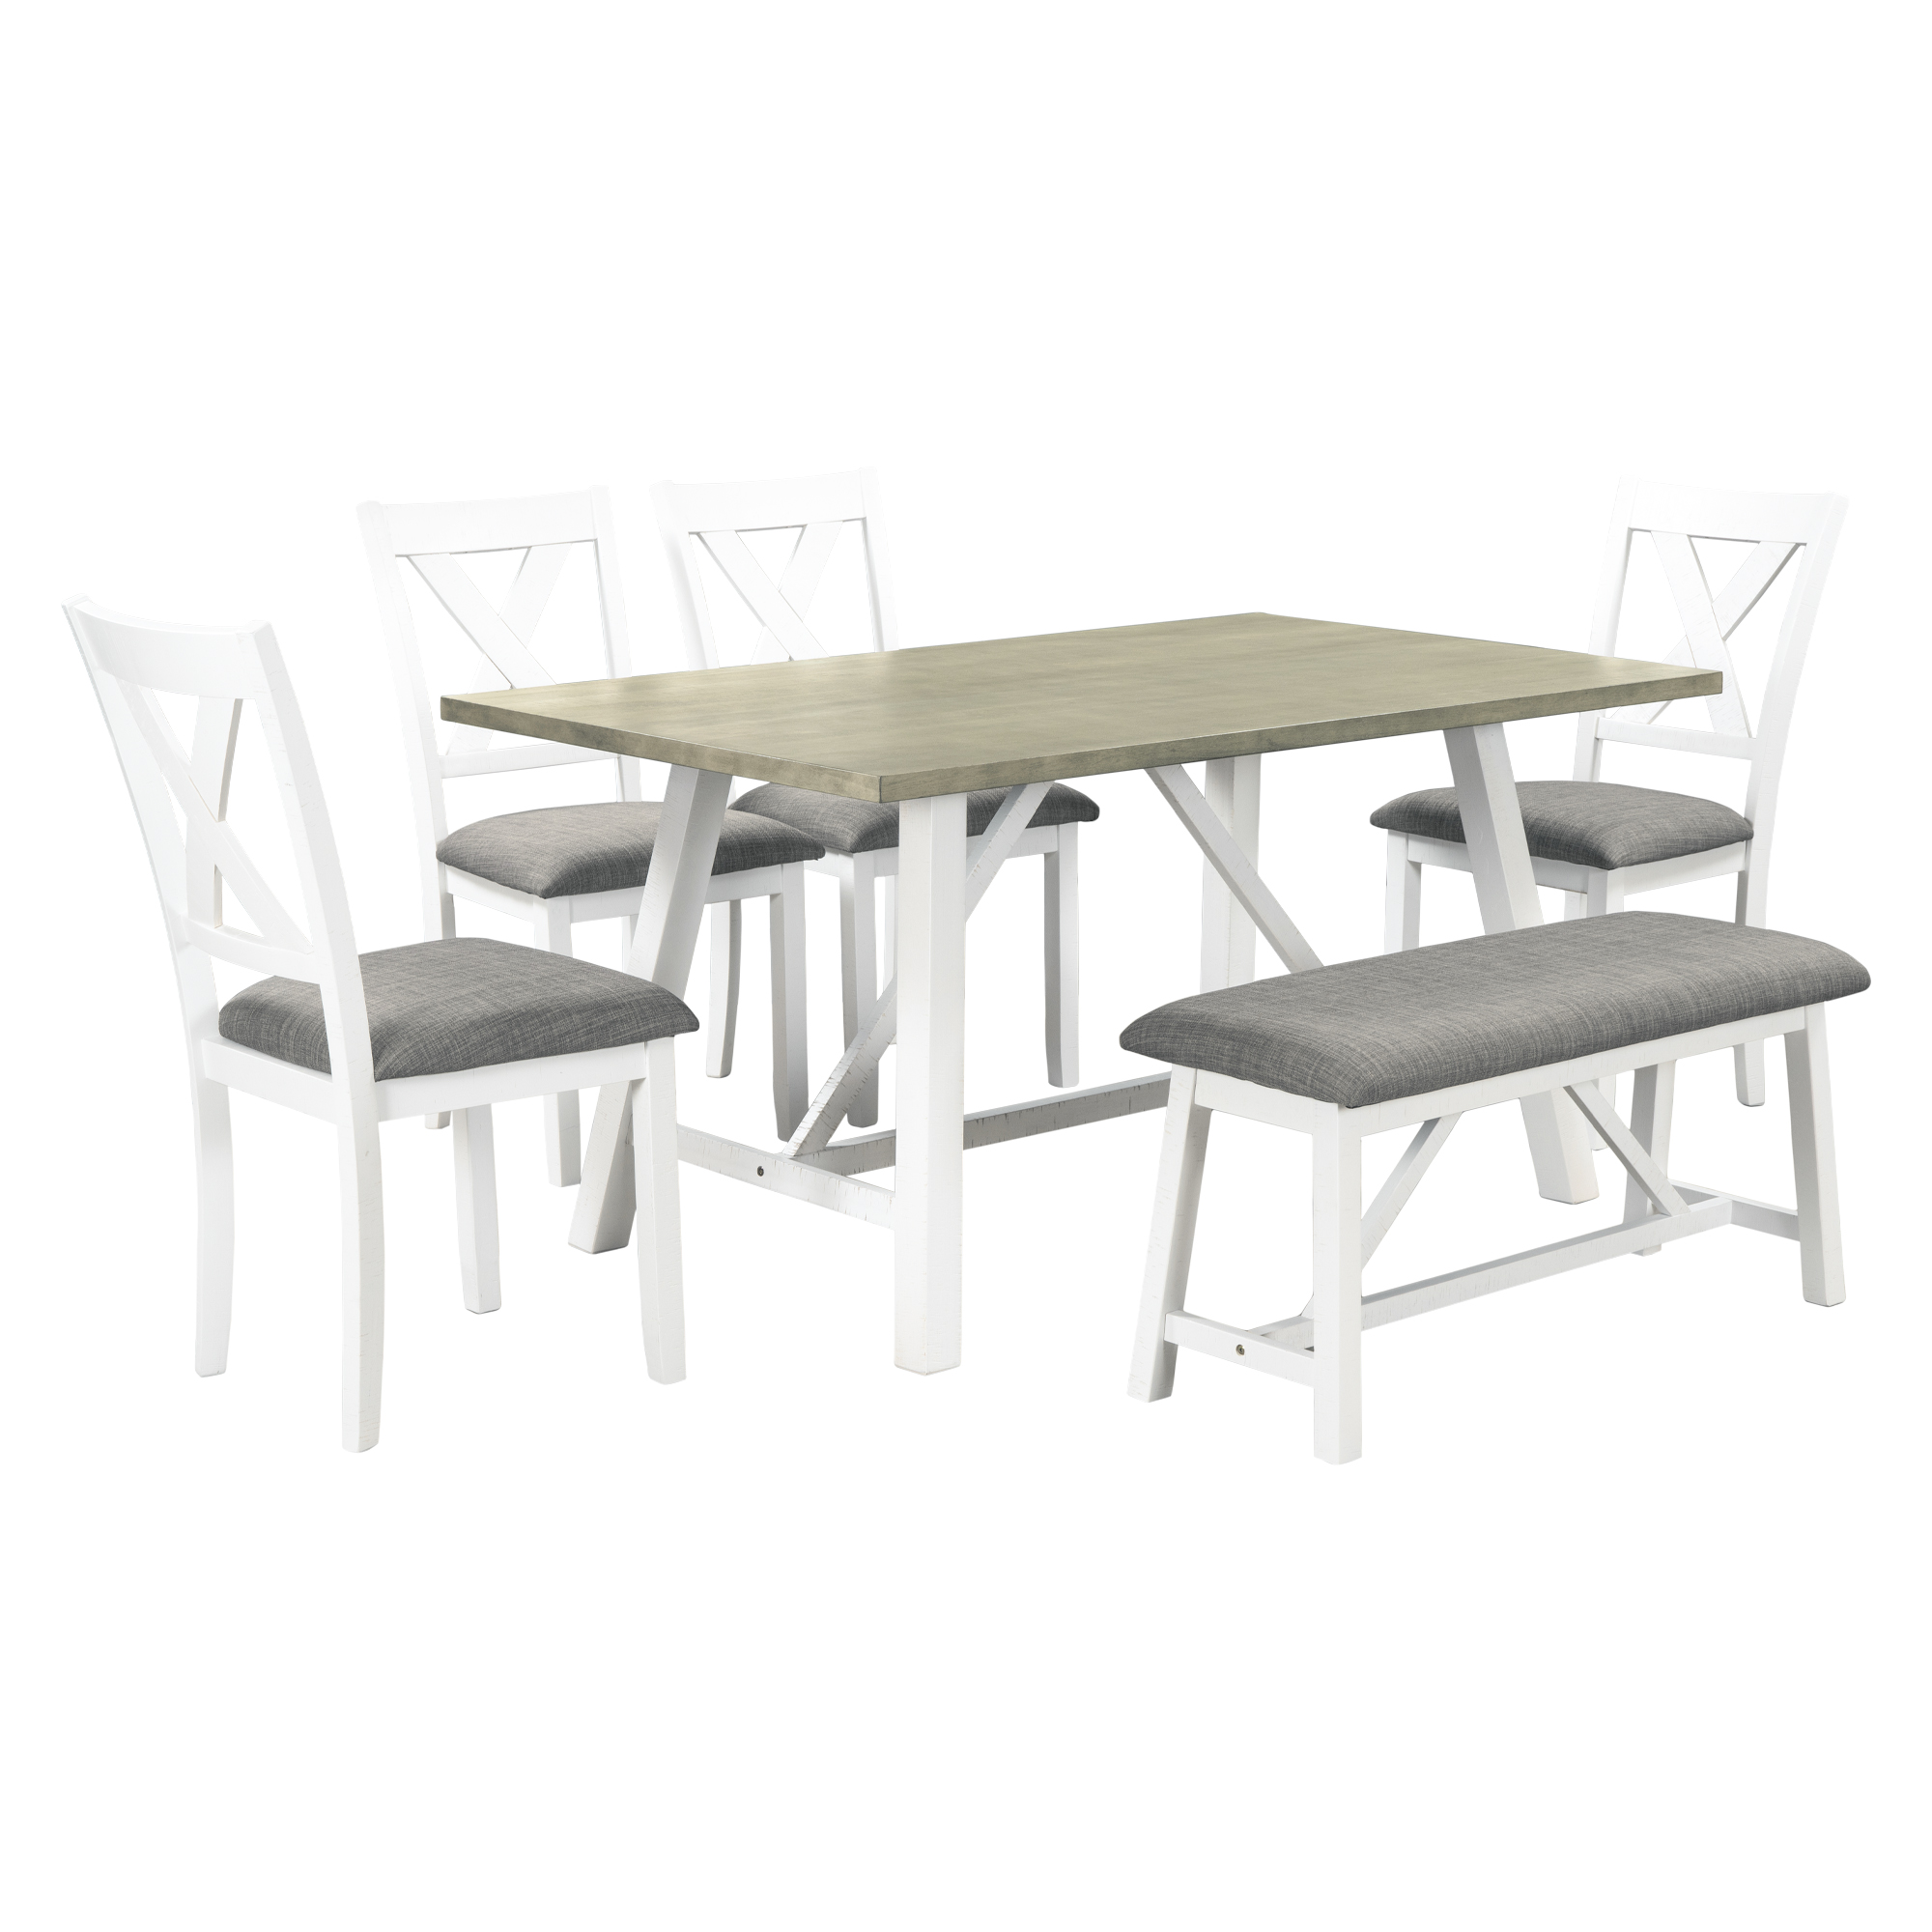 Rustic Style 6 Piece Dining Table Set - SH001091AAK